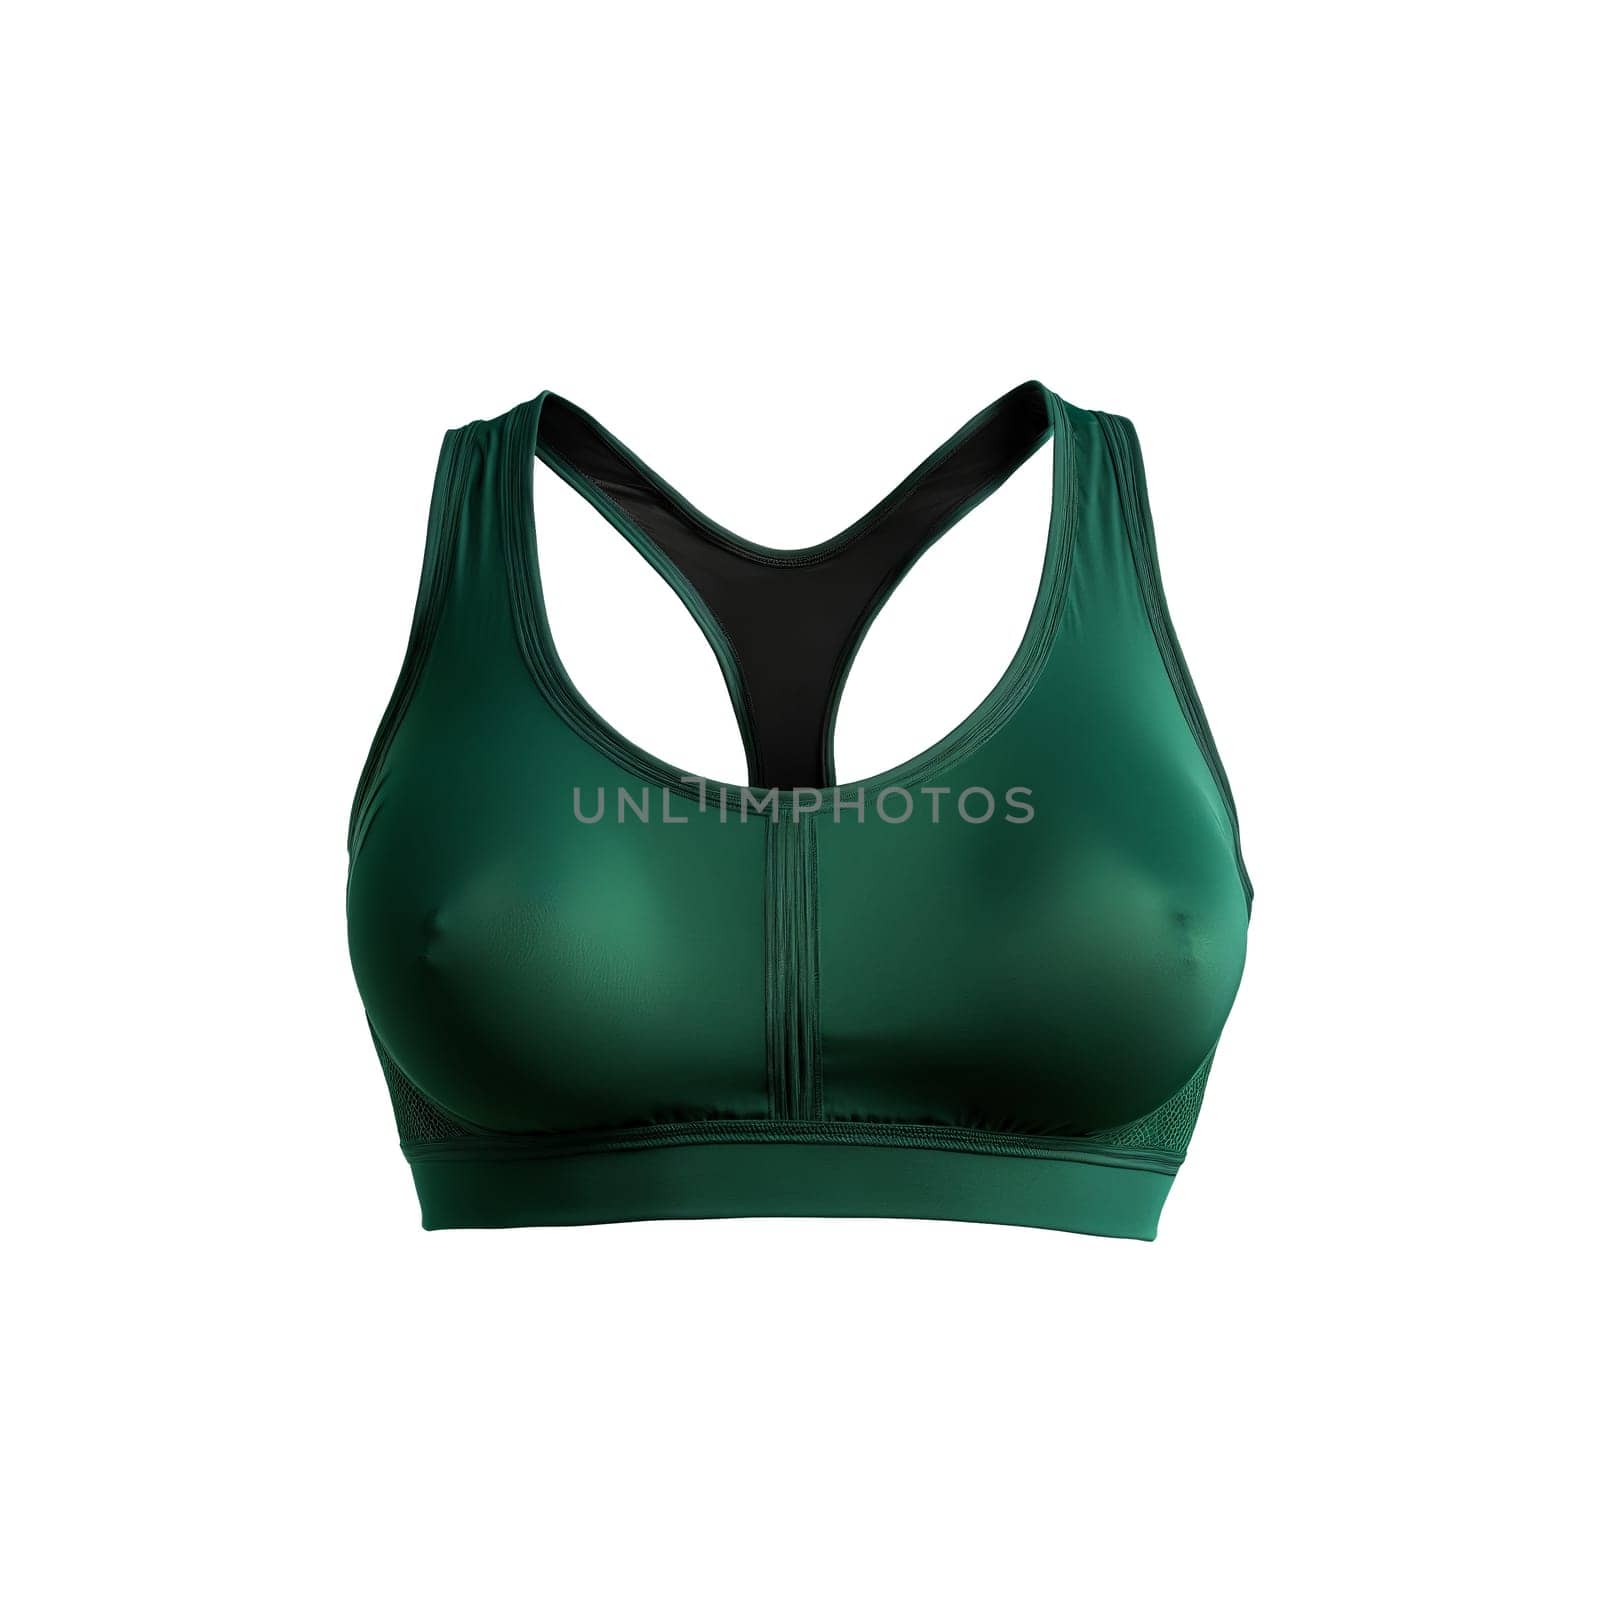 forest green sports bra with mesh inserts twisting and contorting in a dynamic pose every by panophotograph